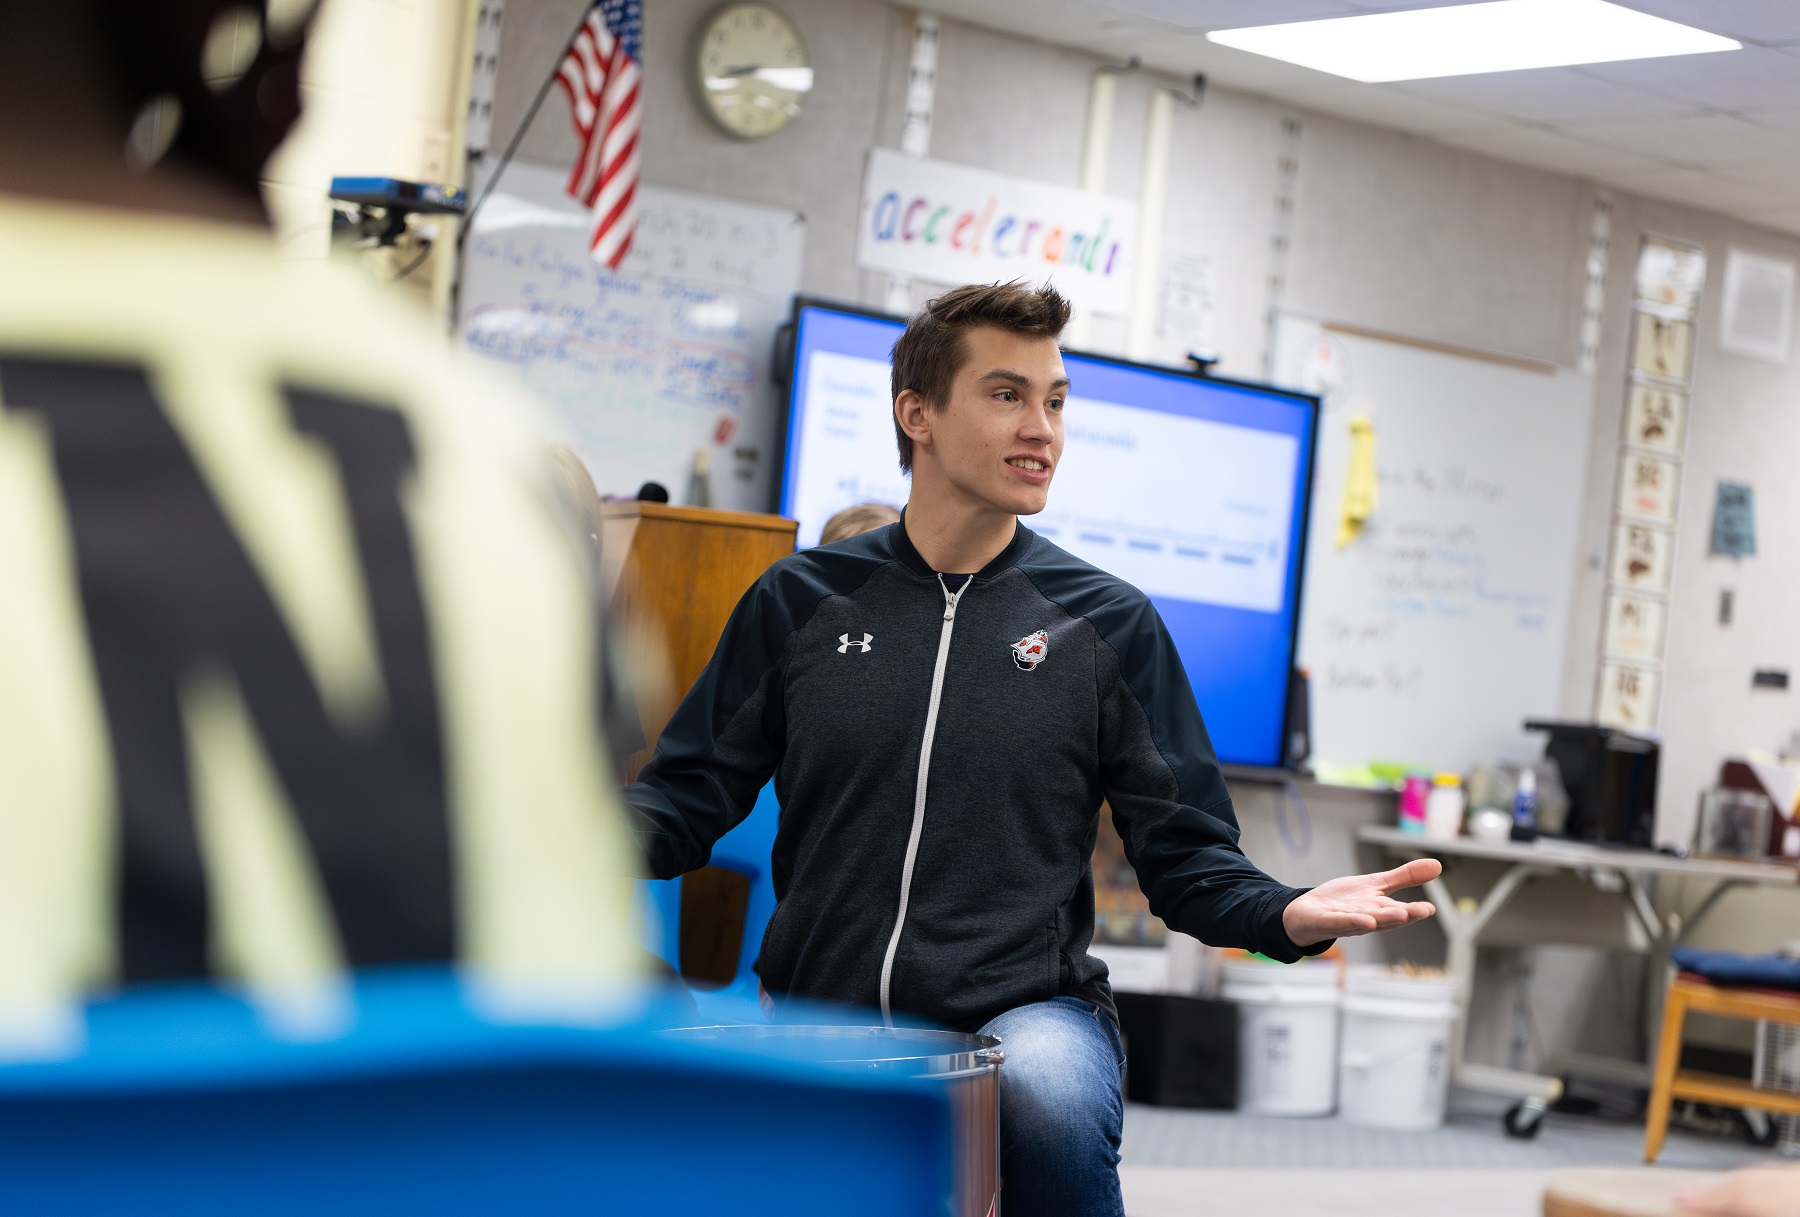 Joey O'Connor, a Lawrence music education student, teaches at Edison Elementary.